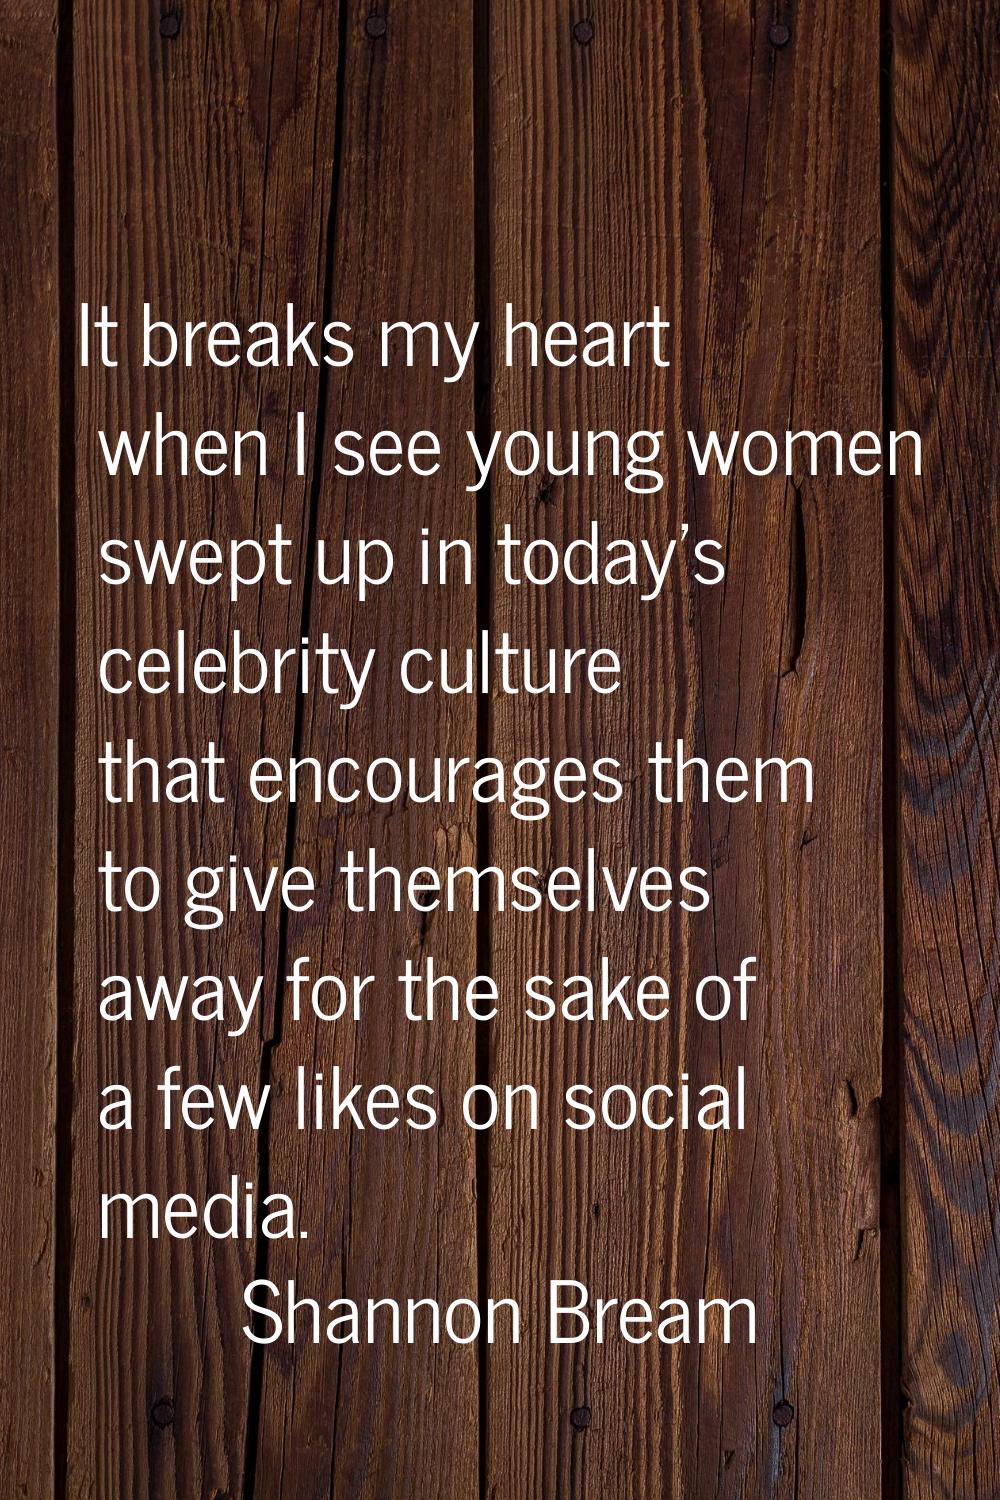 It breaks my heart when I see young women swept up in today's celebrity culture that encourages the